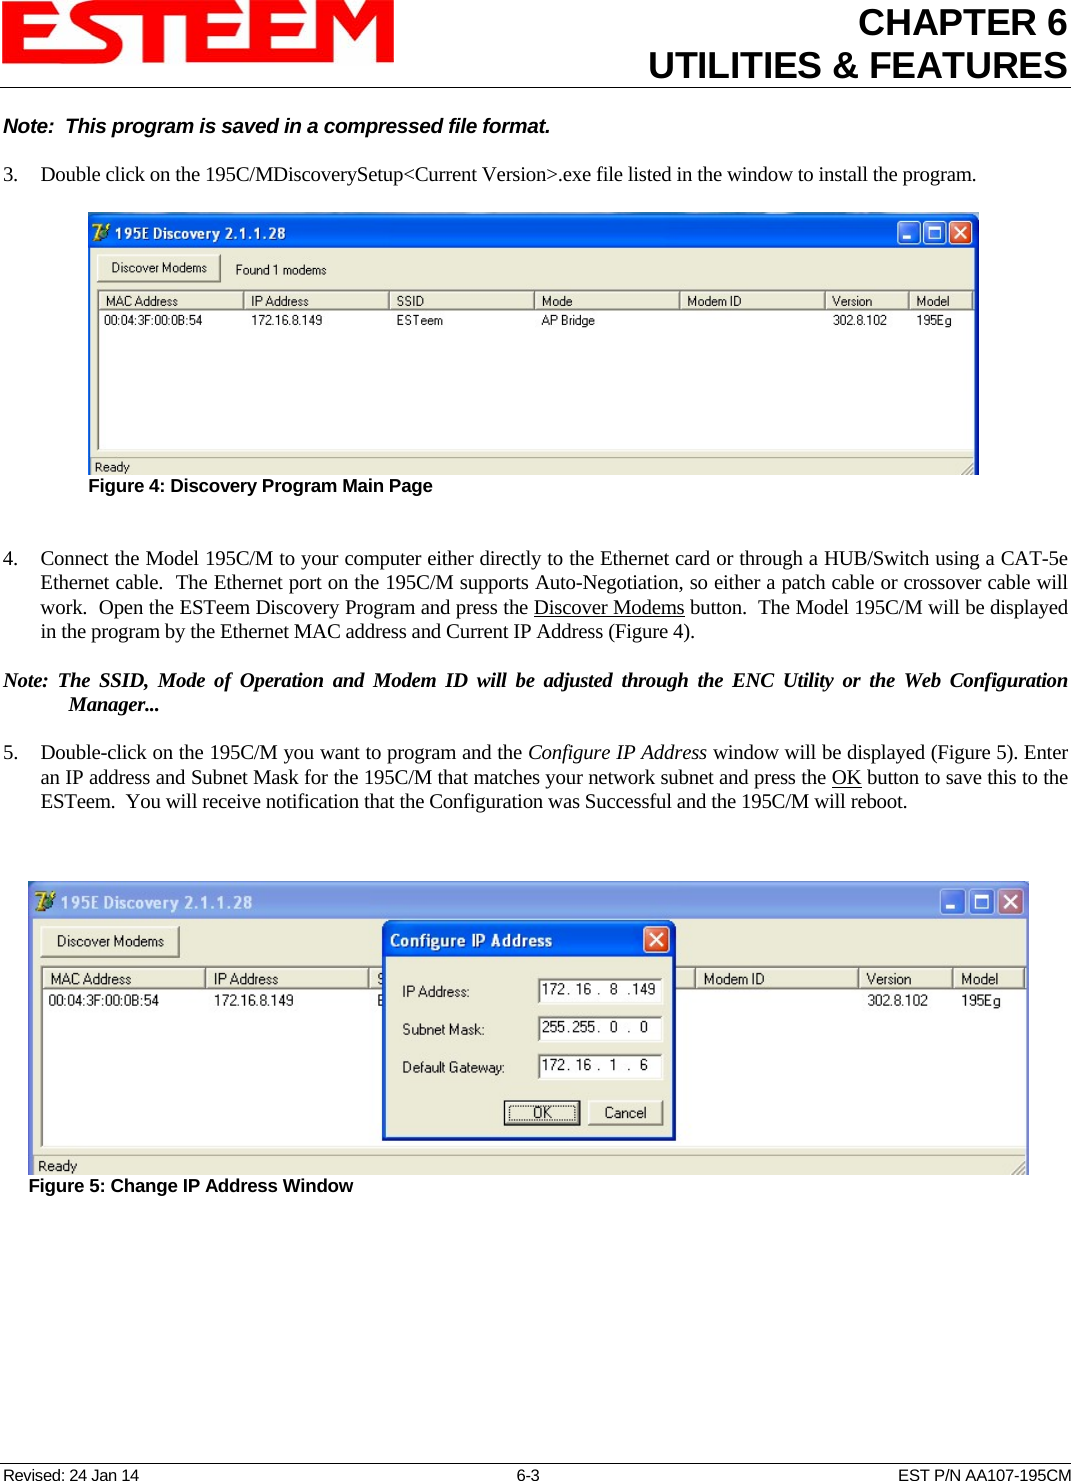 CHAPTER 6UTILITIES &amp; FEATURES  Note:  This program is saved in a compressed file format.  3. Double click on the 195C/MDiscoverySetup&lt;Current Version&gt;.exe file listed in the window to install the program.  Figure 4: Discovery Program Main Page  4. Connect the Model 195C/M to your computer either directly to the Ethernet card or through a HUB/Switch using a CAT-5e Ethernet cable.  The Ethernet port on the 195C/M supports Auto-Negotiation, so either a patch cable or crossover cable will work.  Open the ESTeem Discovery Program and press the Discover Modems button.  The Model 195C/M will be displayed in the program by the Ethernet MAC address and Current IP Address (Figure 4).    Note: The SSID, Mode of Operation and Modem ID will be adjusted through the ENC Utility or the Web Configuration Manager...     5. Double-click on the 195C/M you want to program and the Configure IP Address window will be displayed (Figure 5). Enter an IP address and Subnet Mask for the 195C/M that matches your network subnet and press the OK button to save this to the ESTeem.  You will receive notification that the Configuration was Successful and the 195C/M will reboot.   Figure 5: Change IP Address Window  Revised: 24 Jan 14  6-3  EST P/N AA107-195CM 